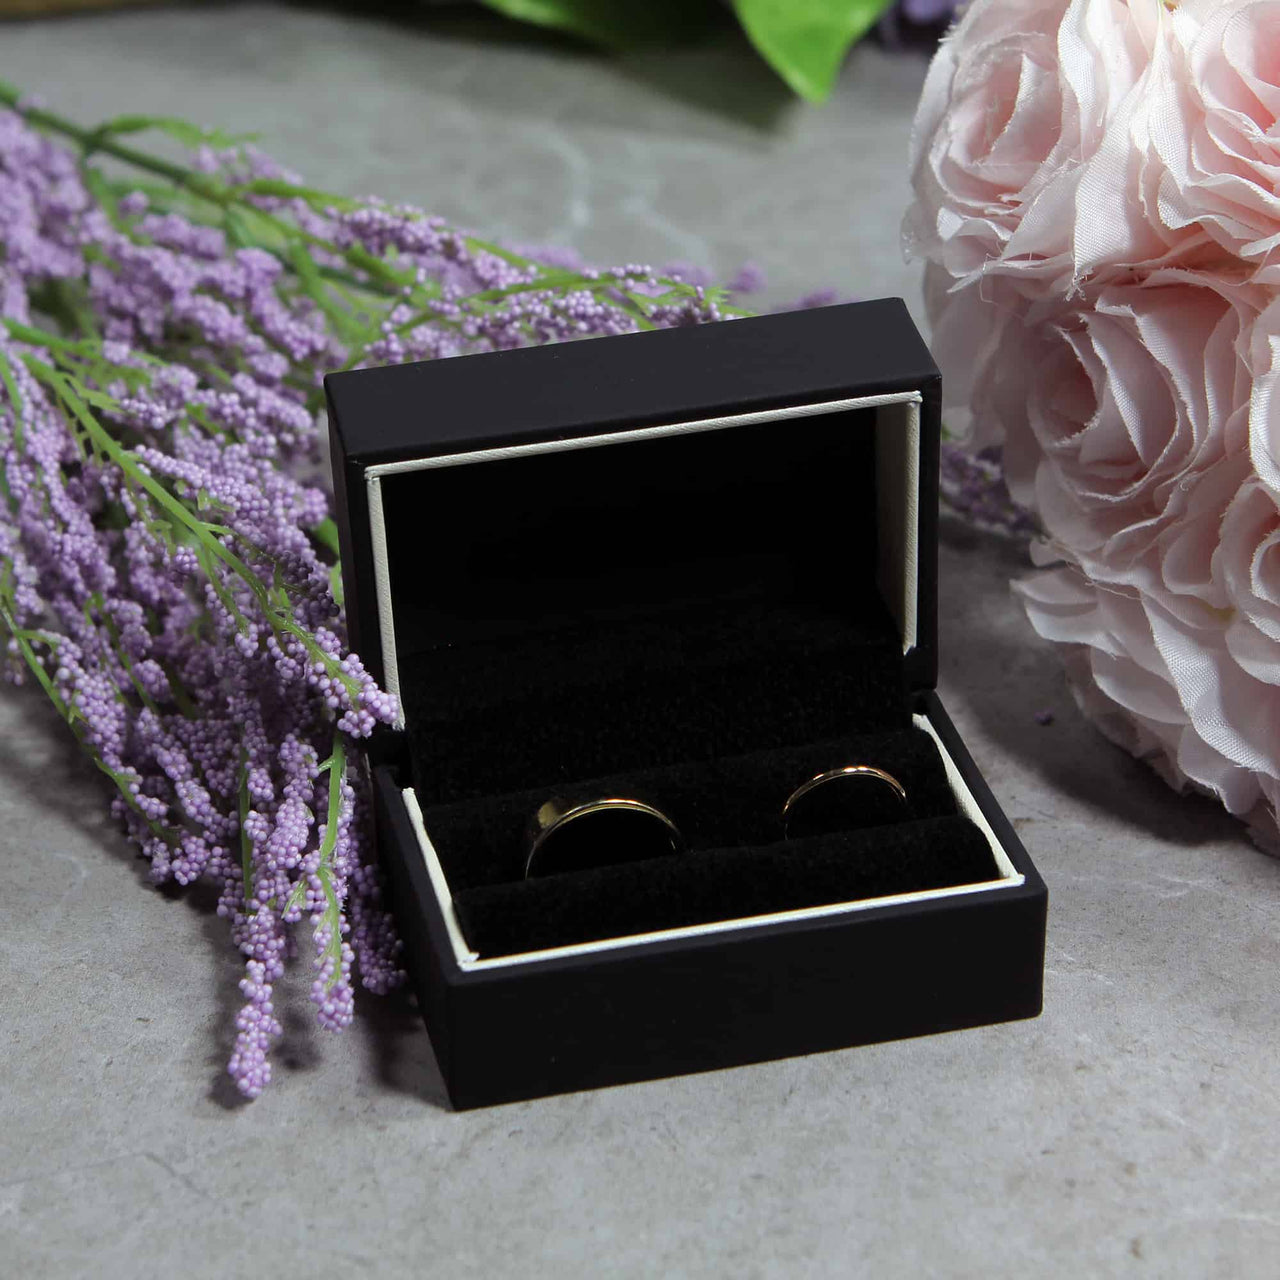 black and white ring box for weddings, fits 2 rings within for wedding bands and ceremonies